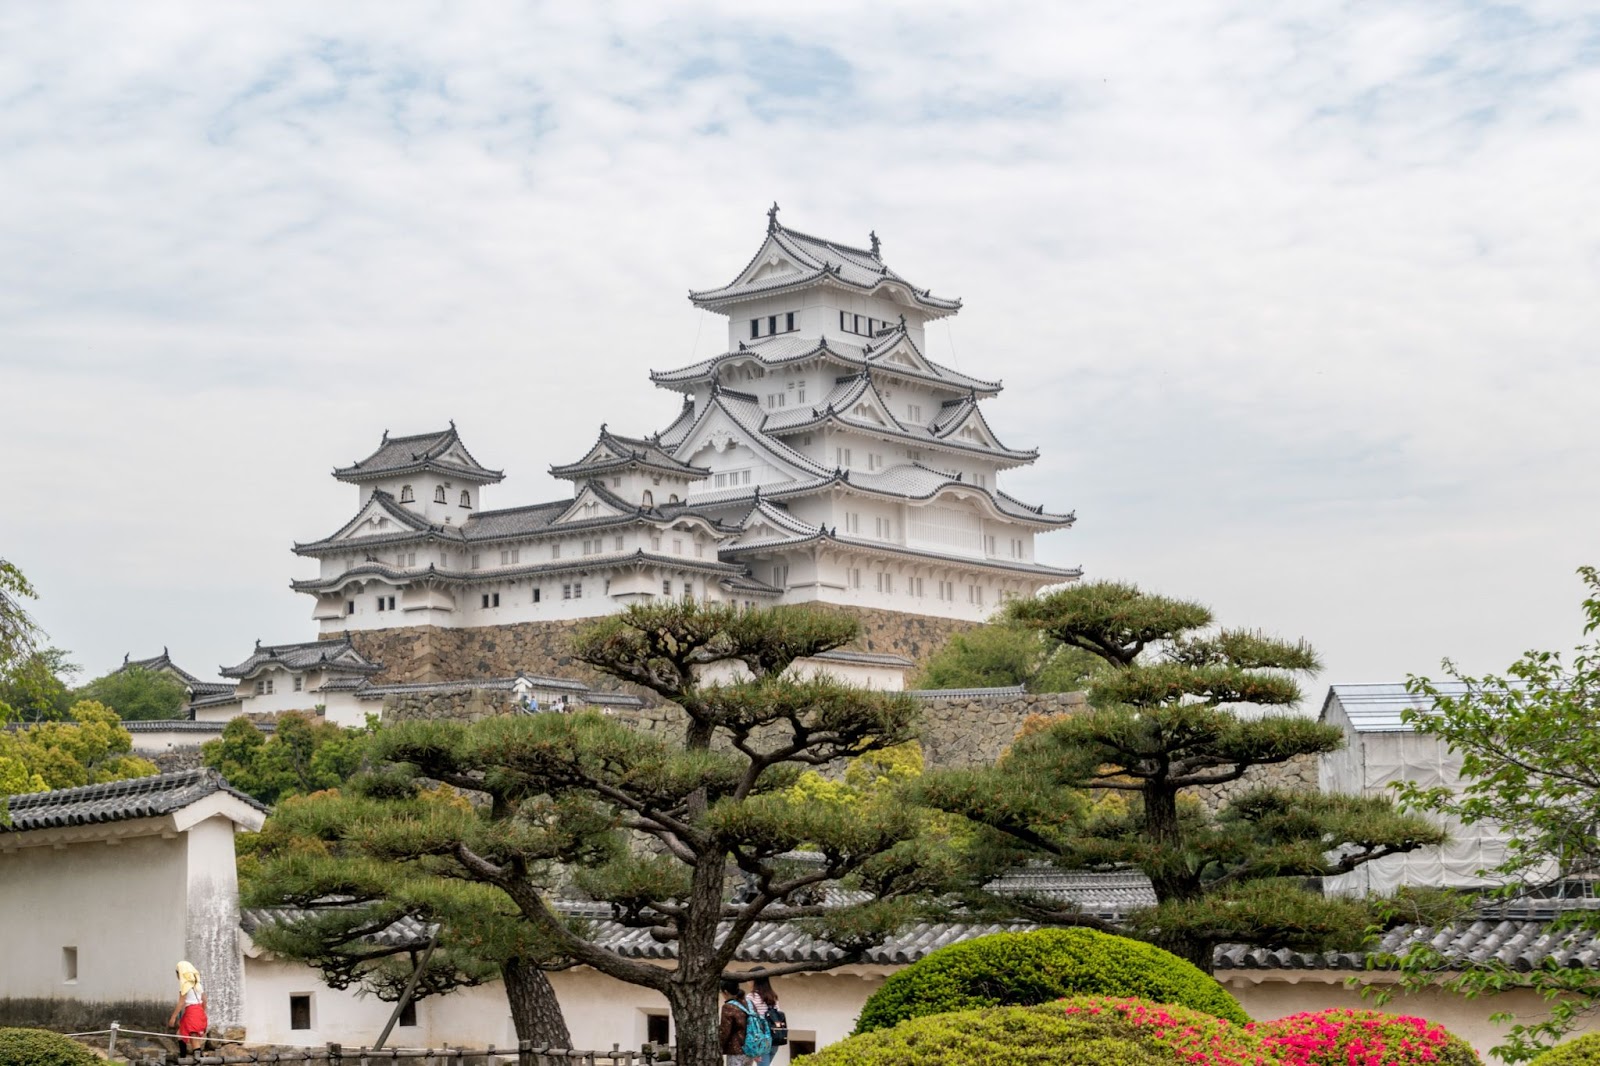 Food, Art and Music Festival at Himeji Castle